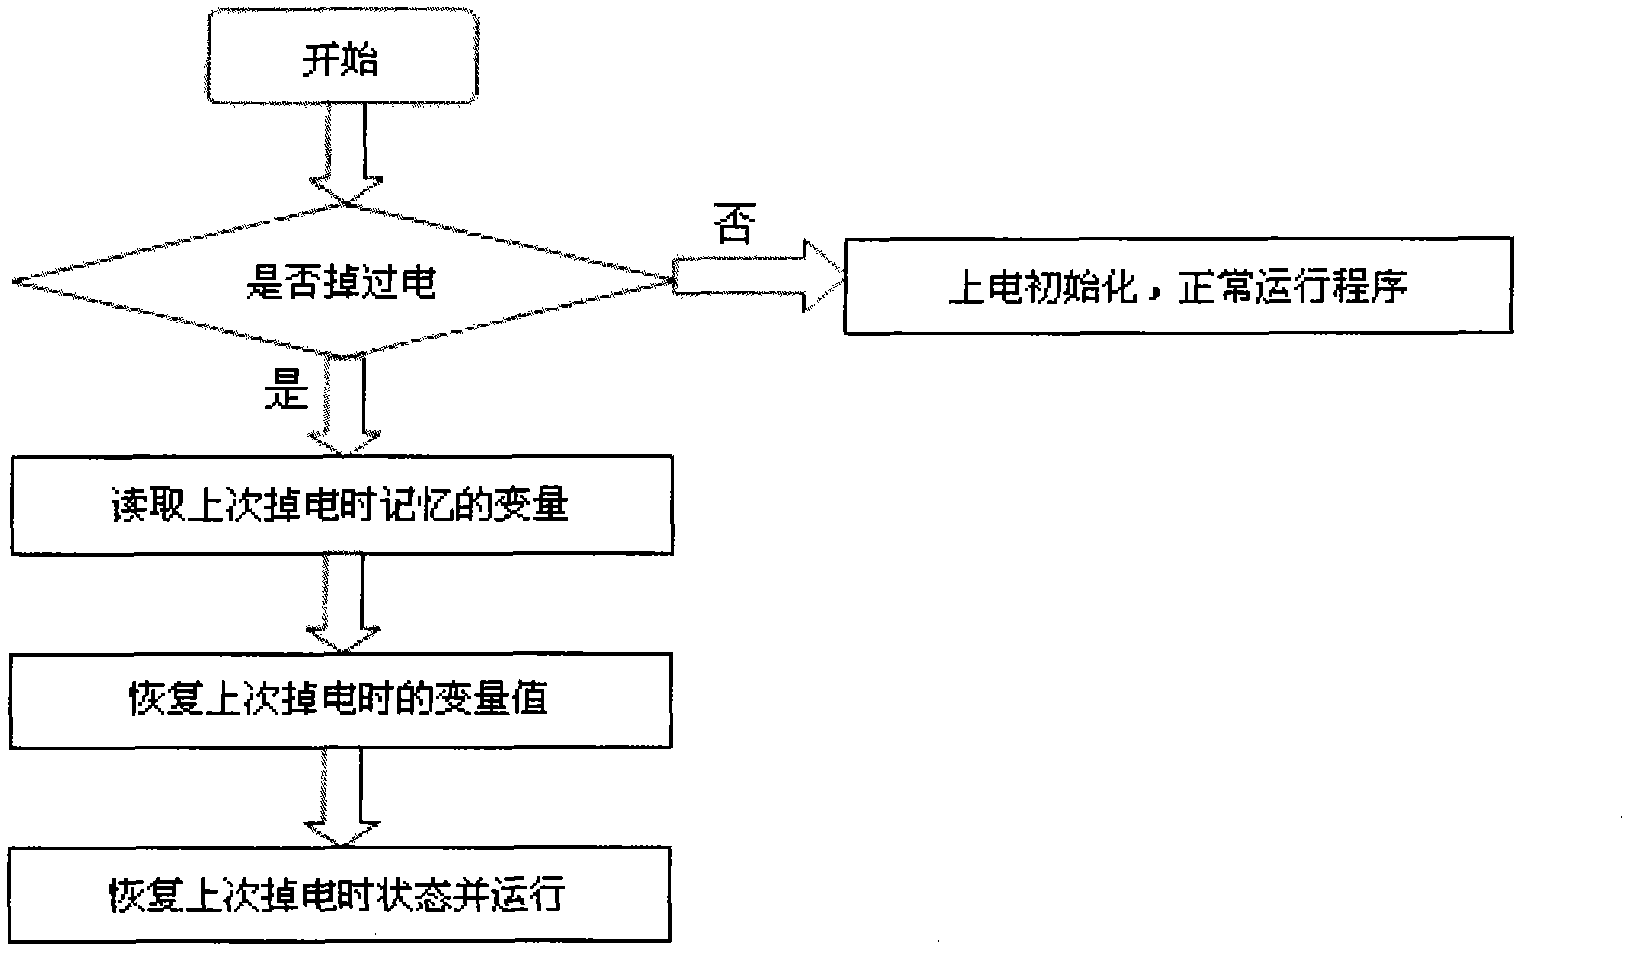 Fully automatic washing machine instantaneous power off memory circuit and processing method thereof